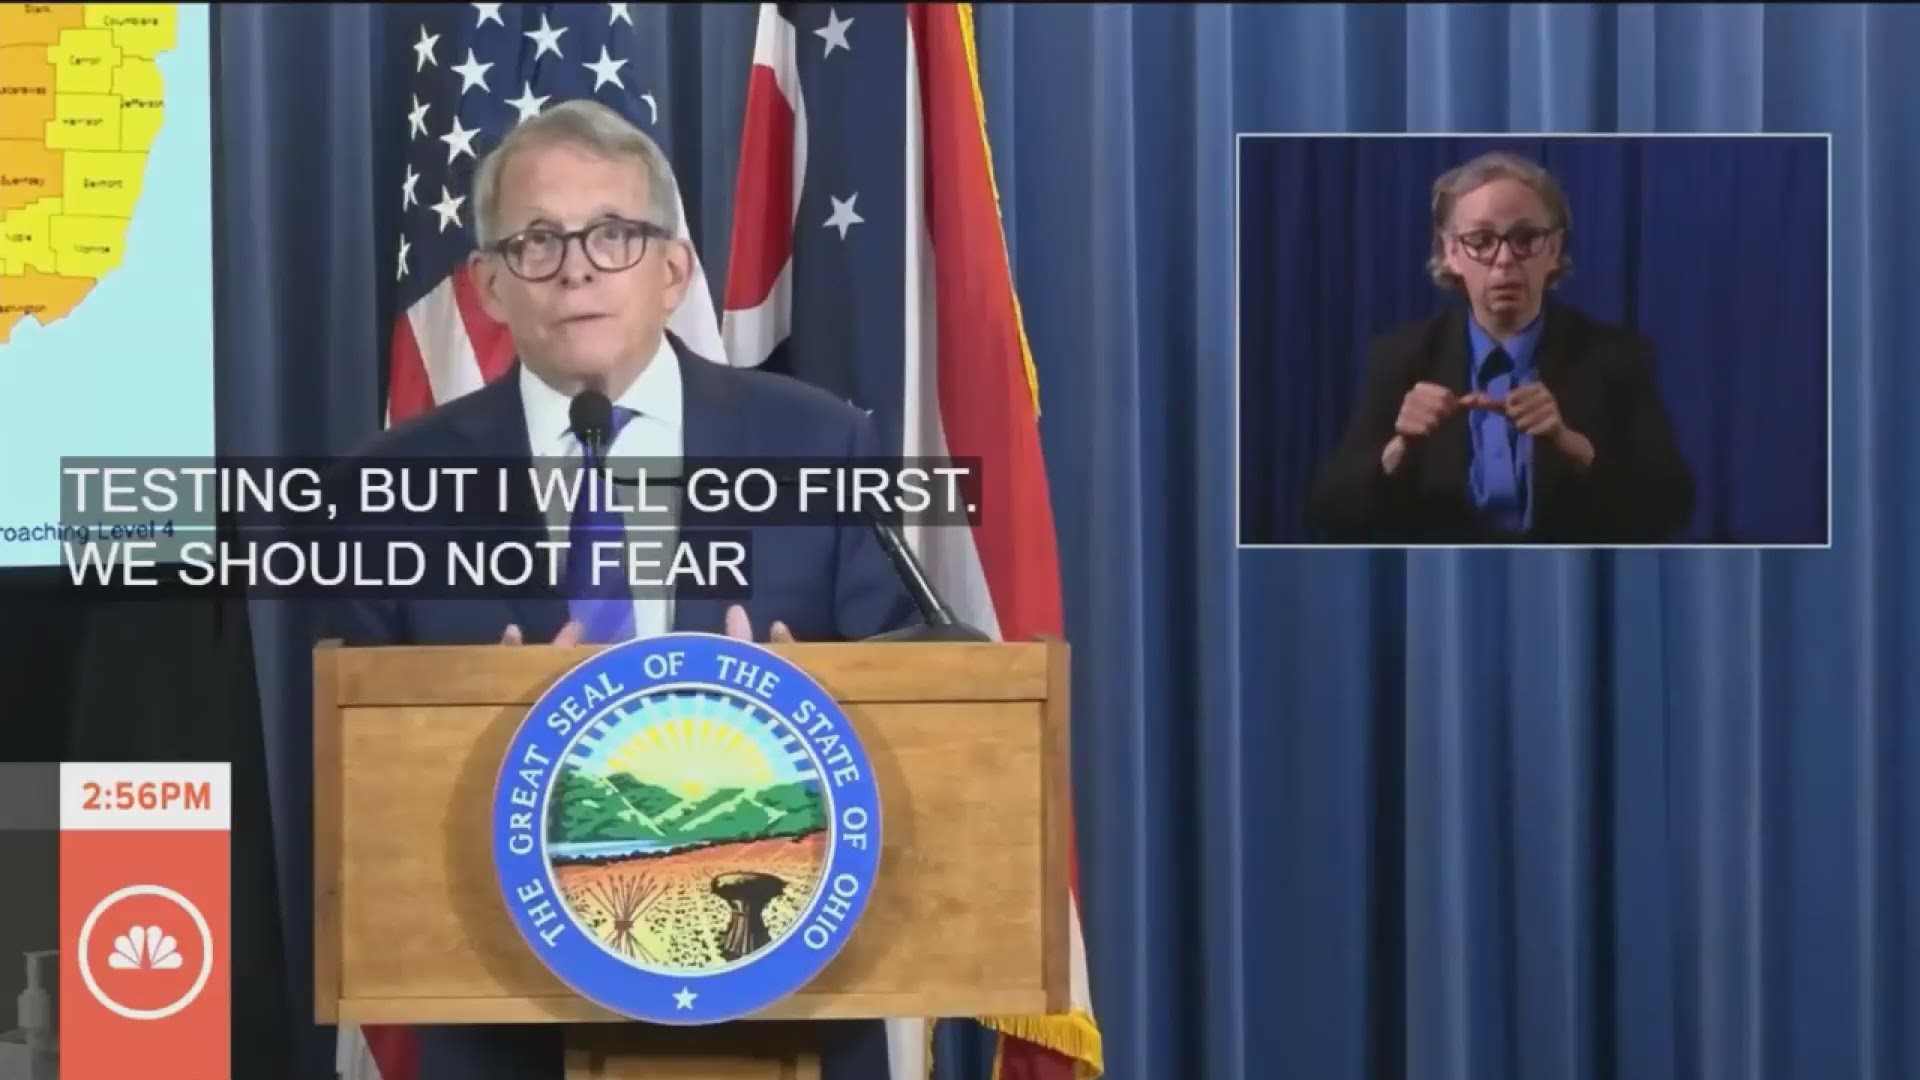 "We’re going to get out of this," Gov. DeWine said of the COVID-19 pandemic. "There is sunlight out there. We are going towards it. We’re going to make it."